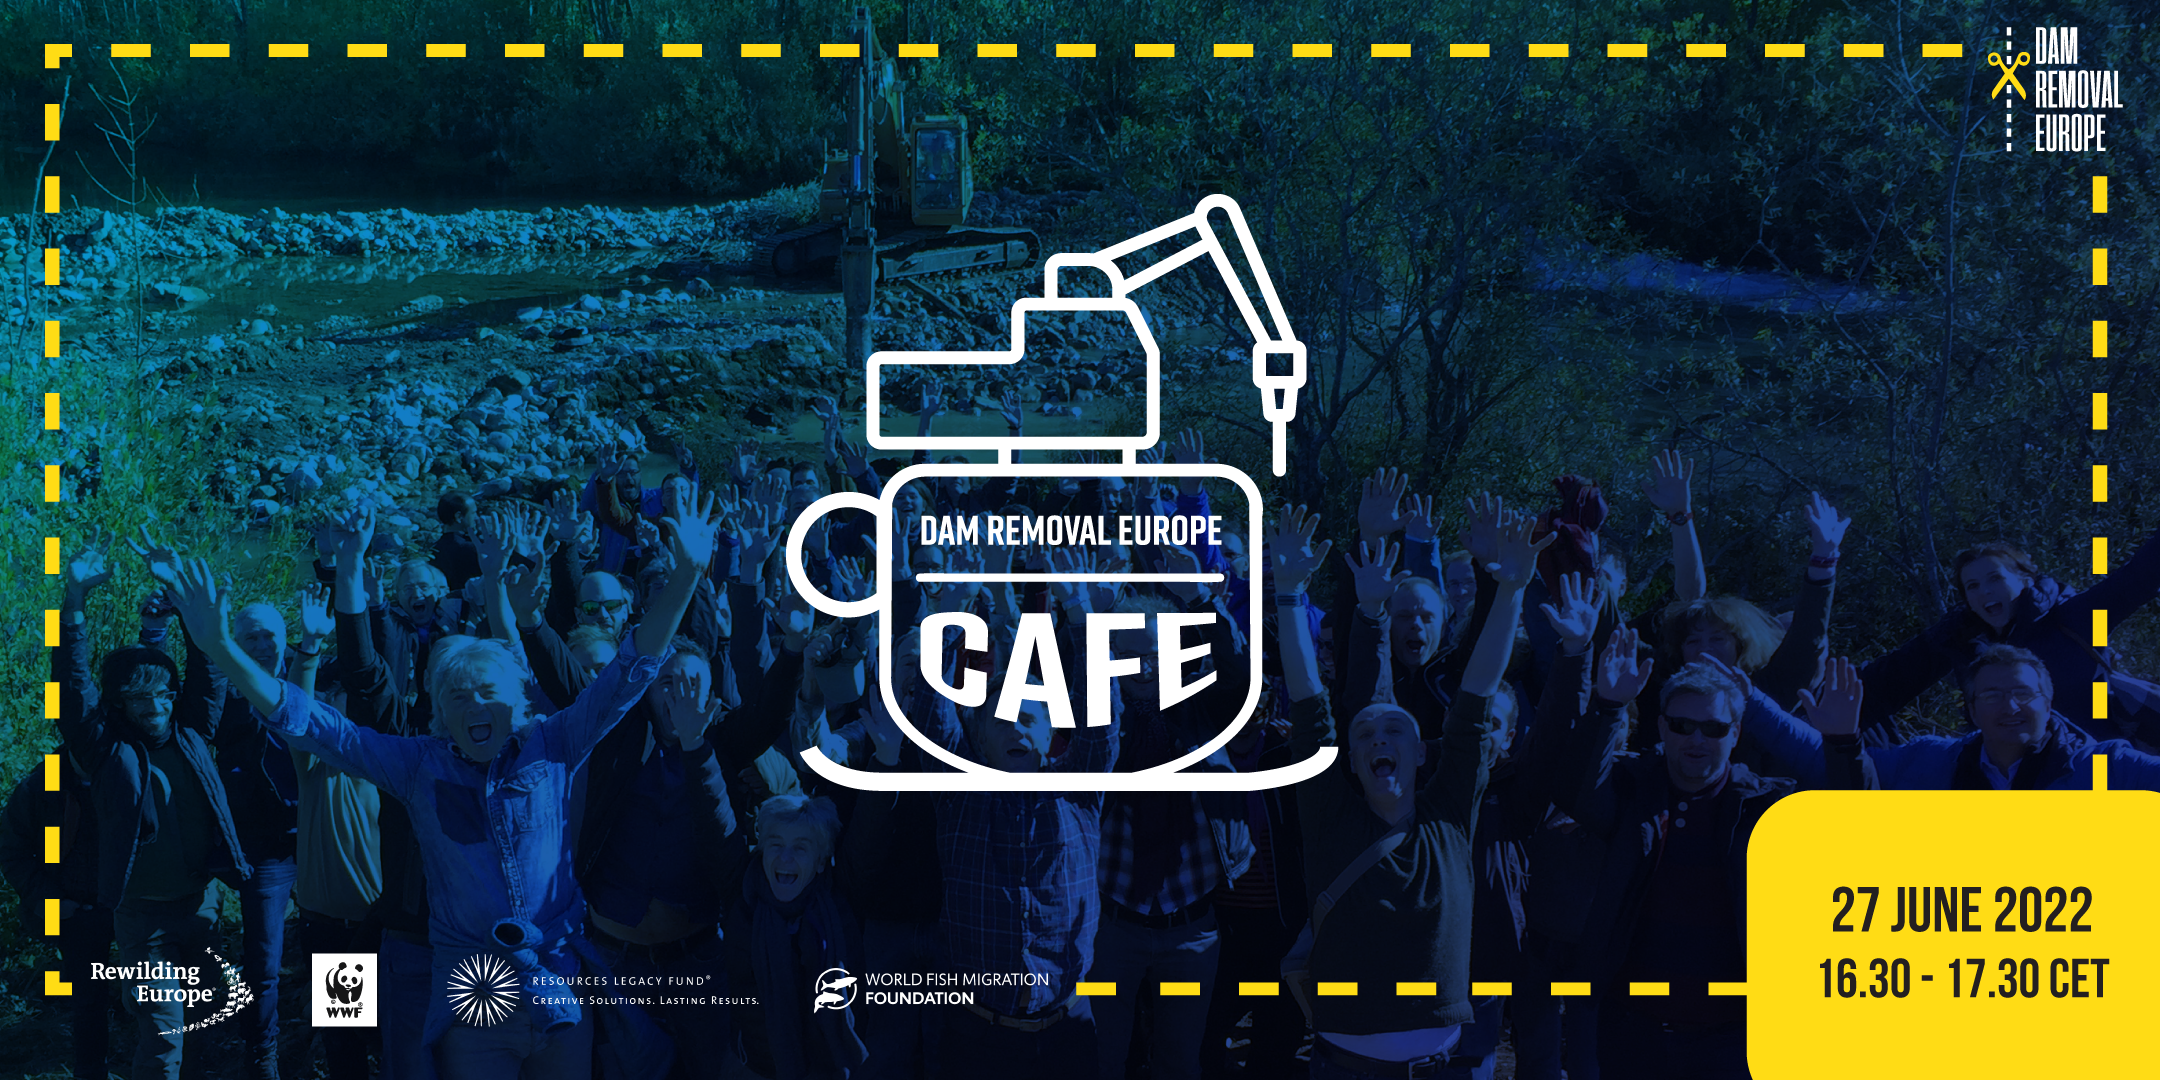 2nd Dam Removal Europe Cafe